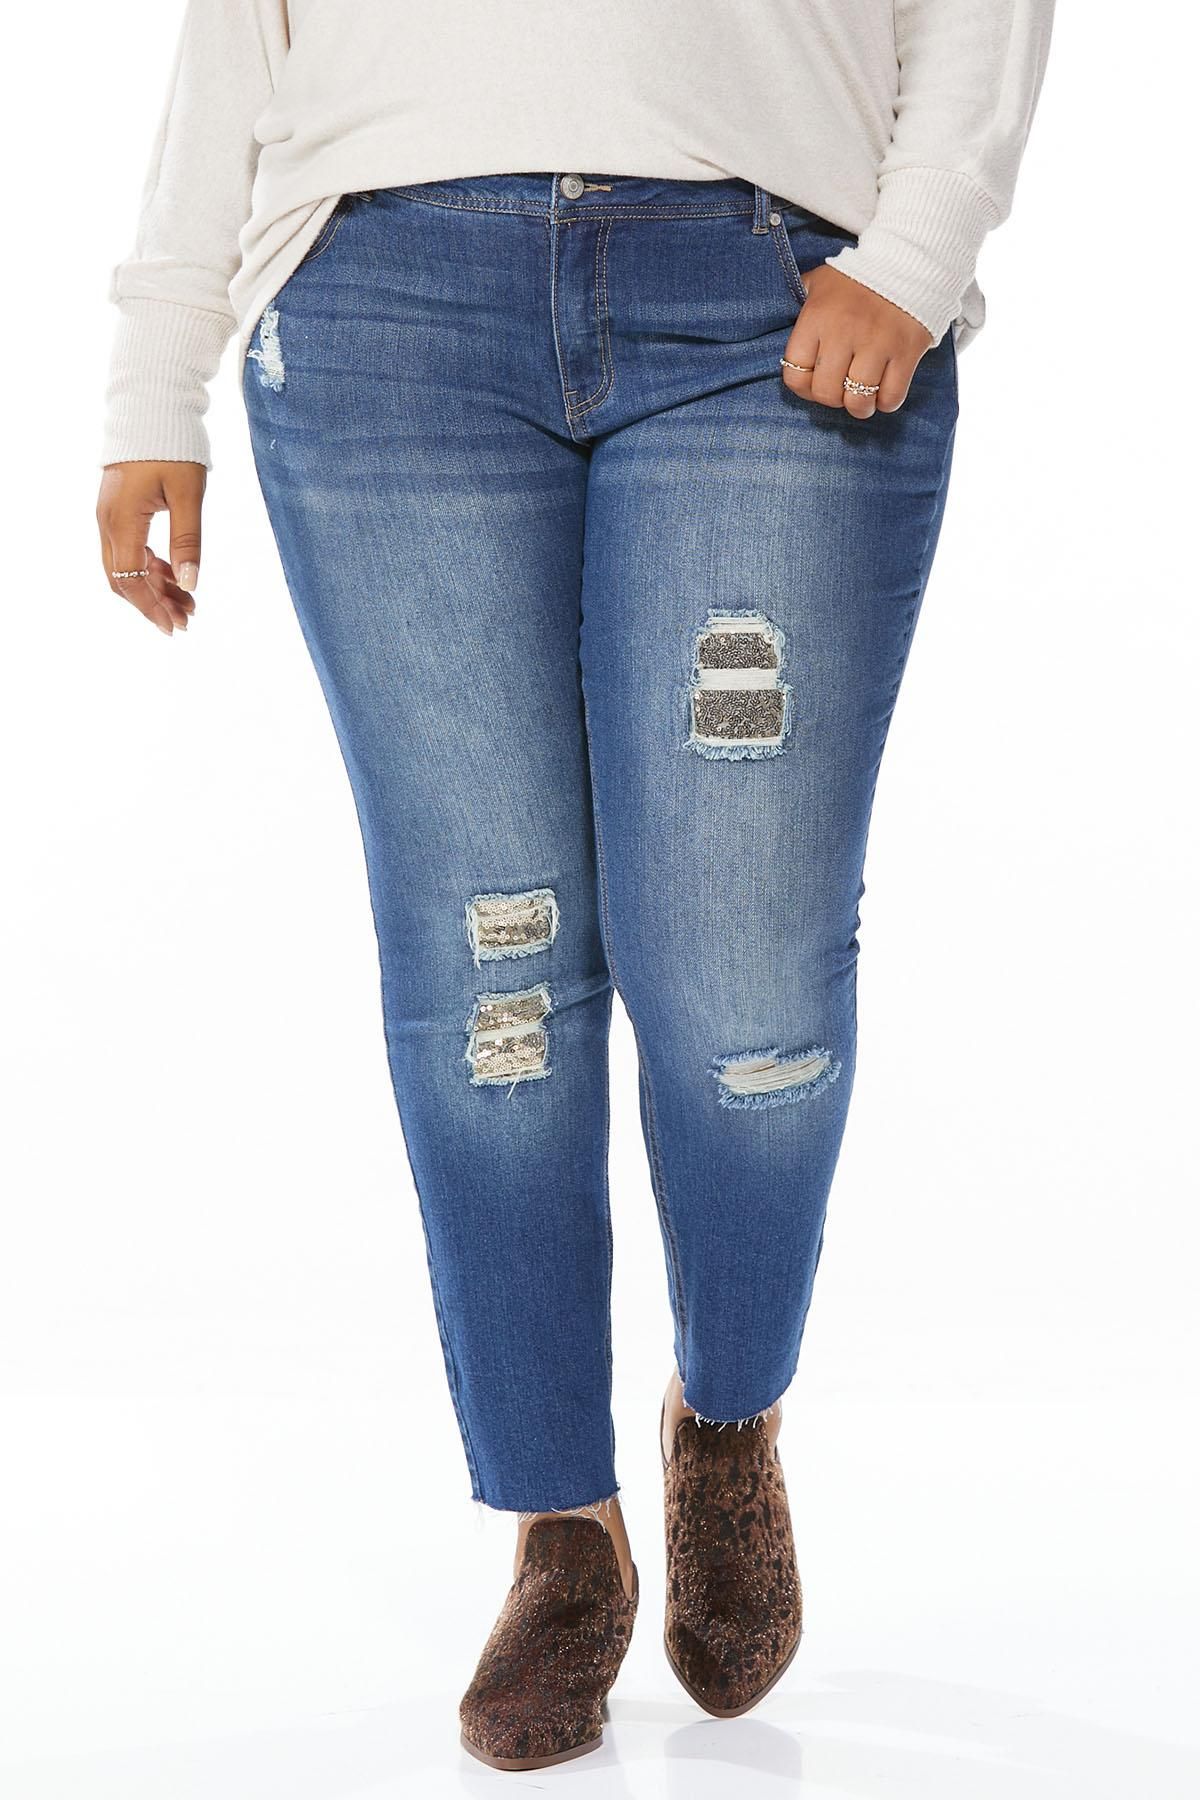 Plus Size Distressed Sequin Jeans | Cato Fashions